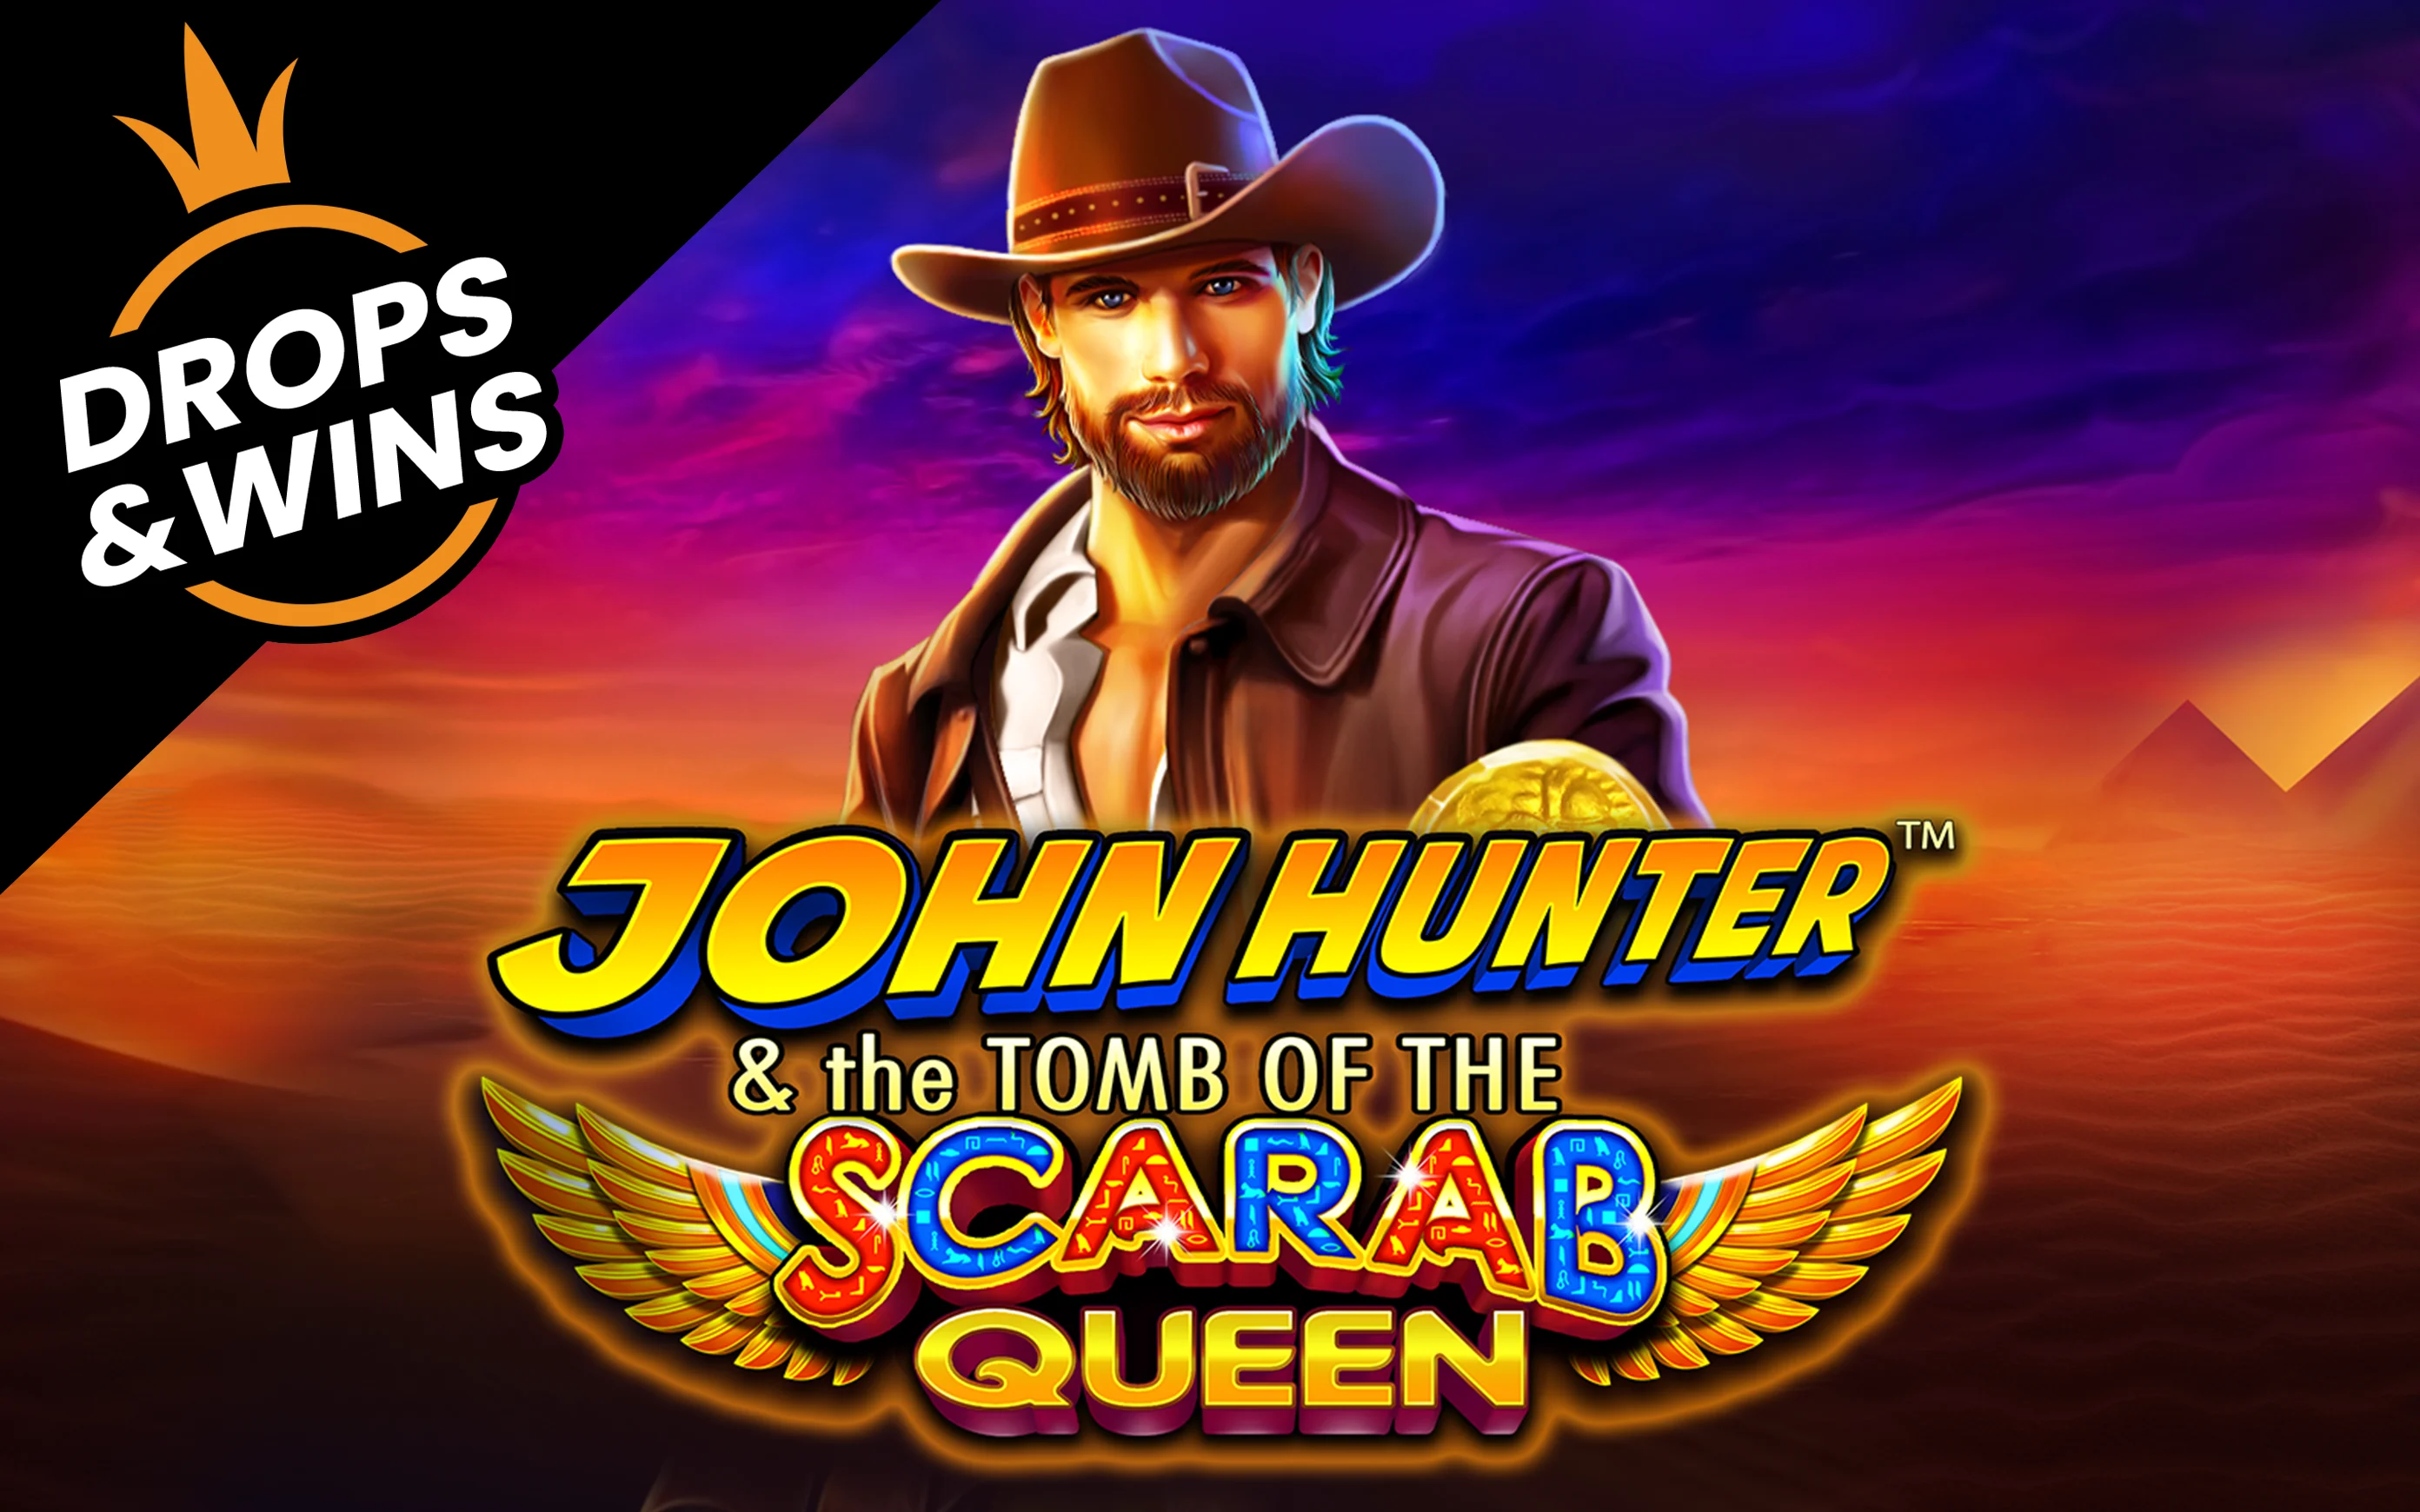 Jogue John Hunter and the Tomb of the Scarab Queen™ no casino online Starcasino.be 